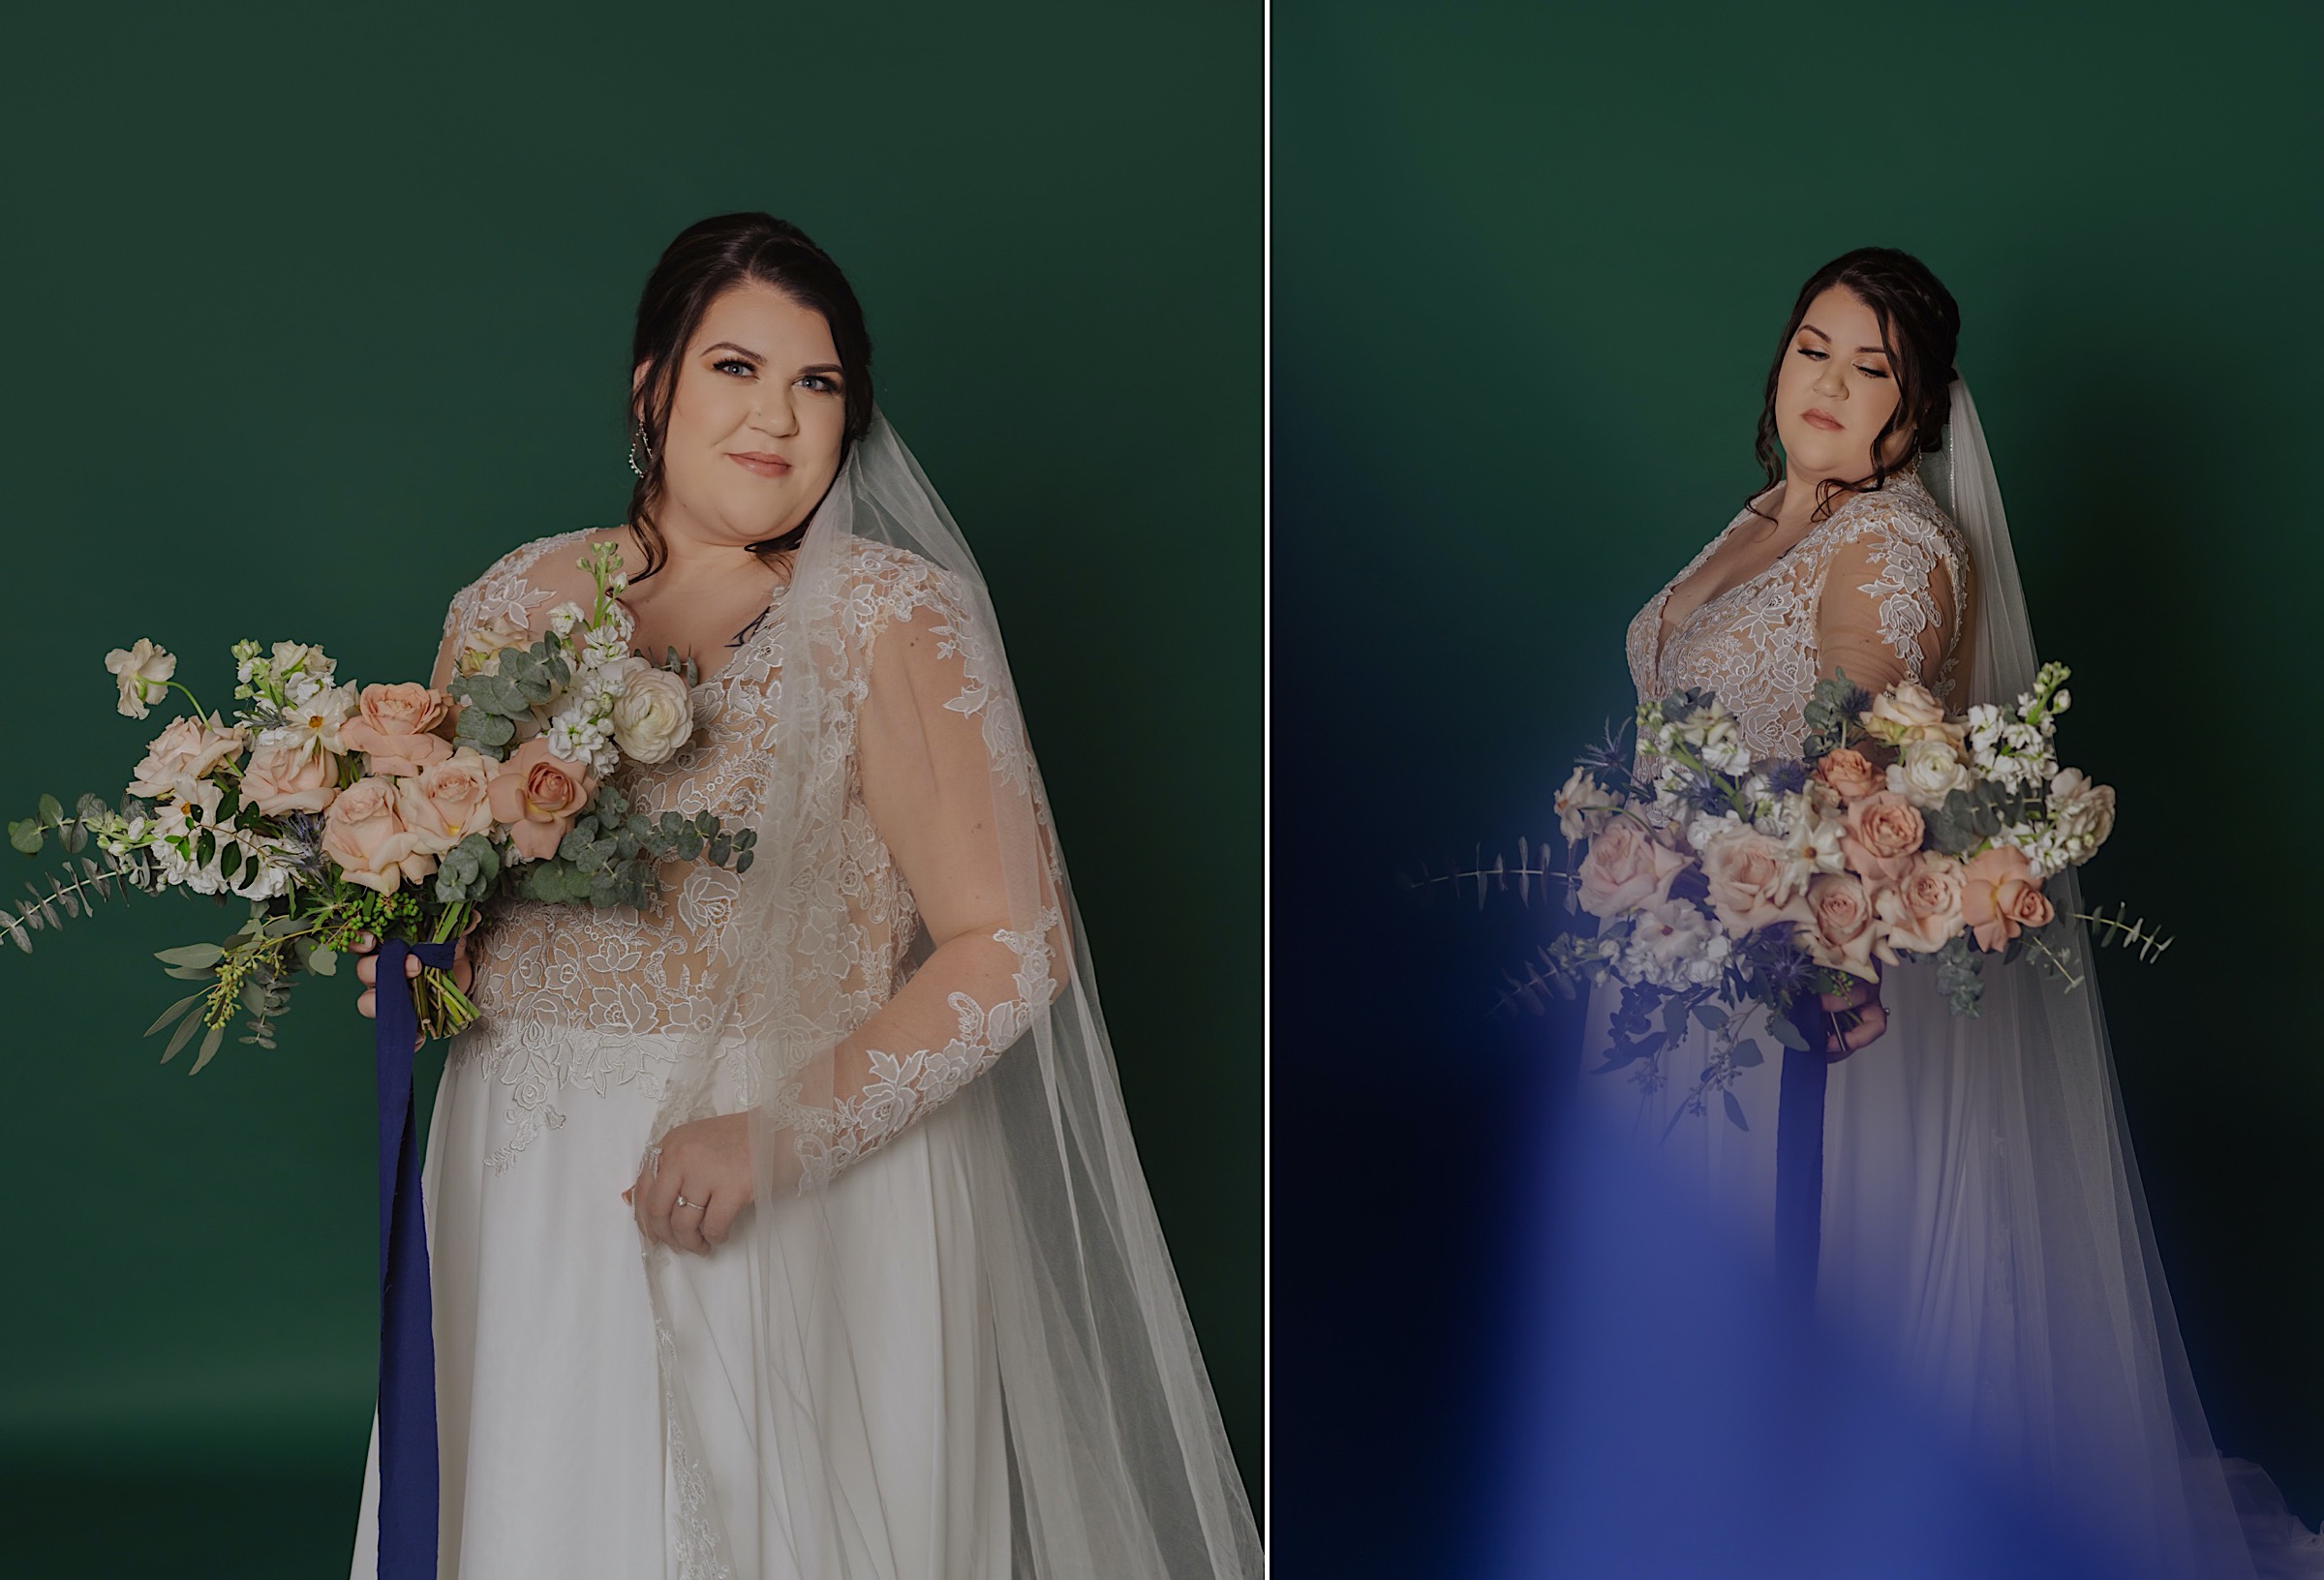 studio-bridal-portraits-session-photo-green-background-blue-long-sleeve-lace-dress-pink-light-green-bouquet